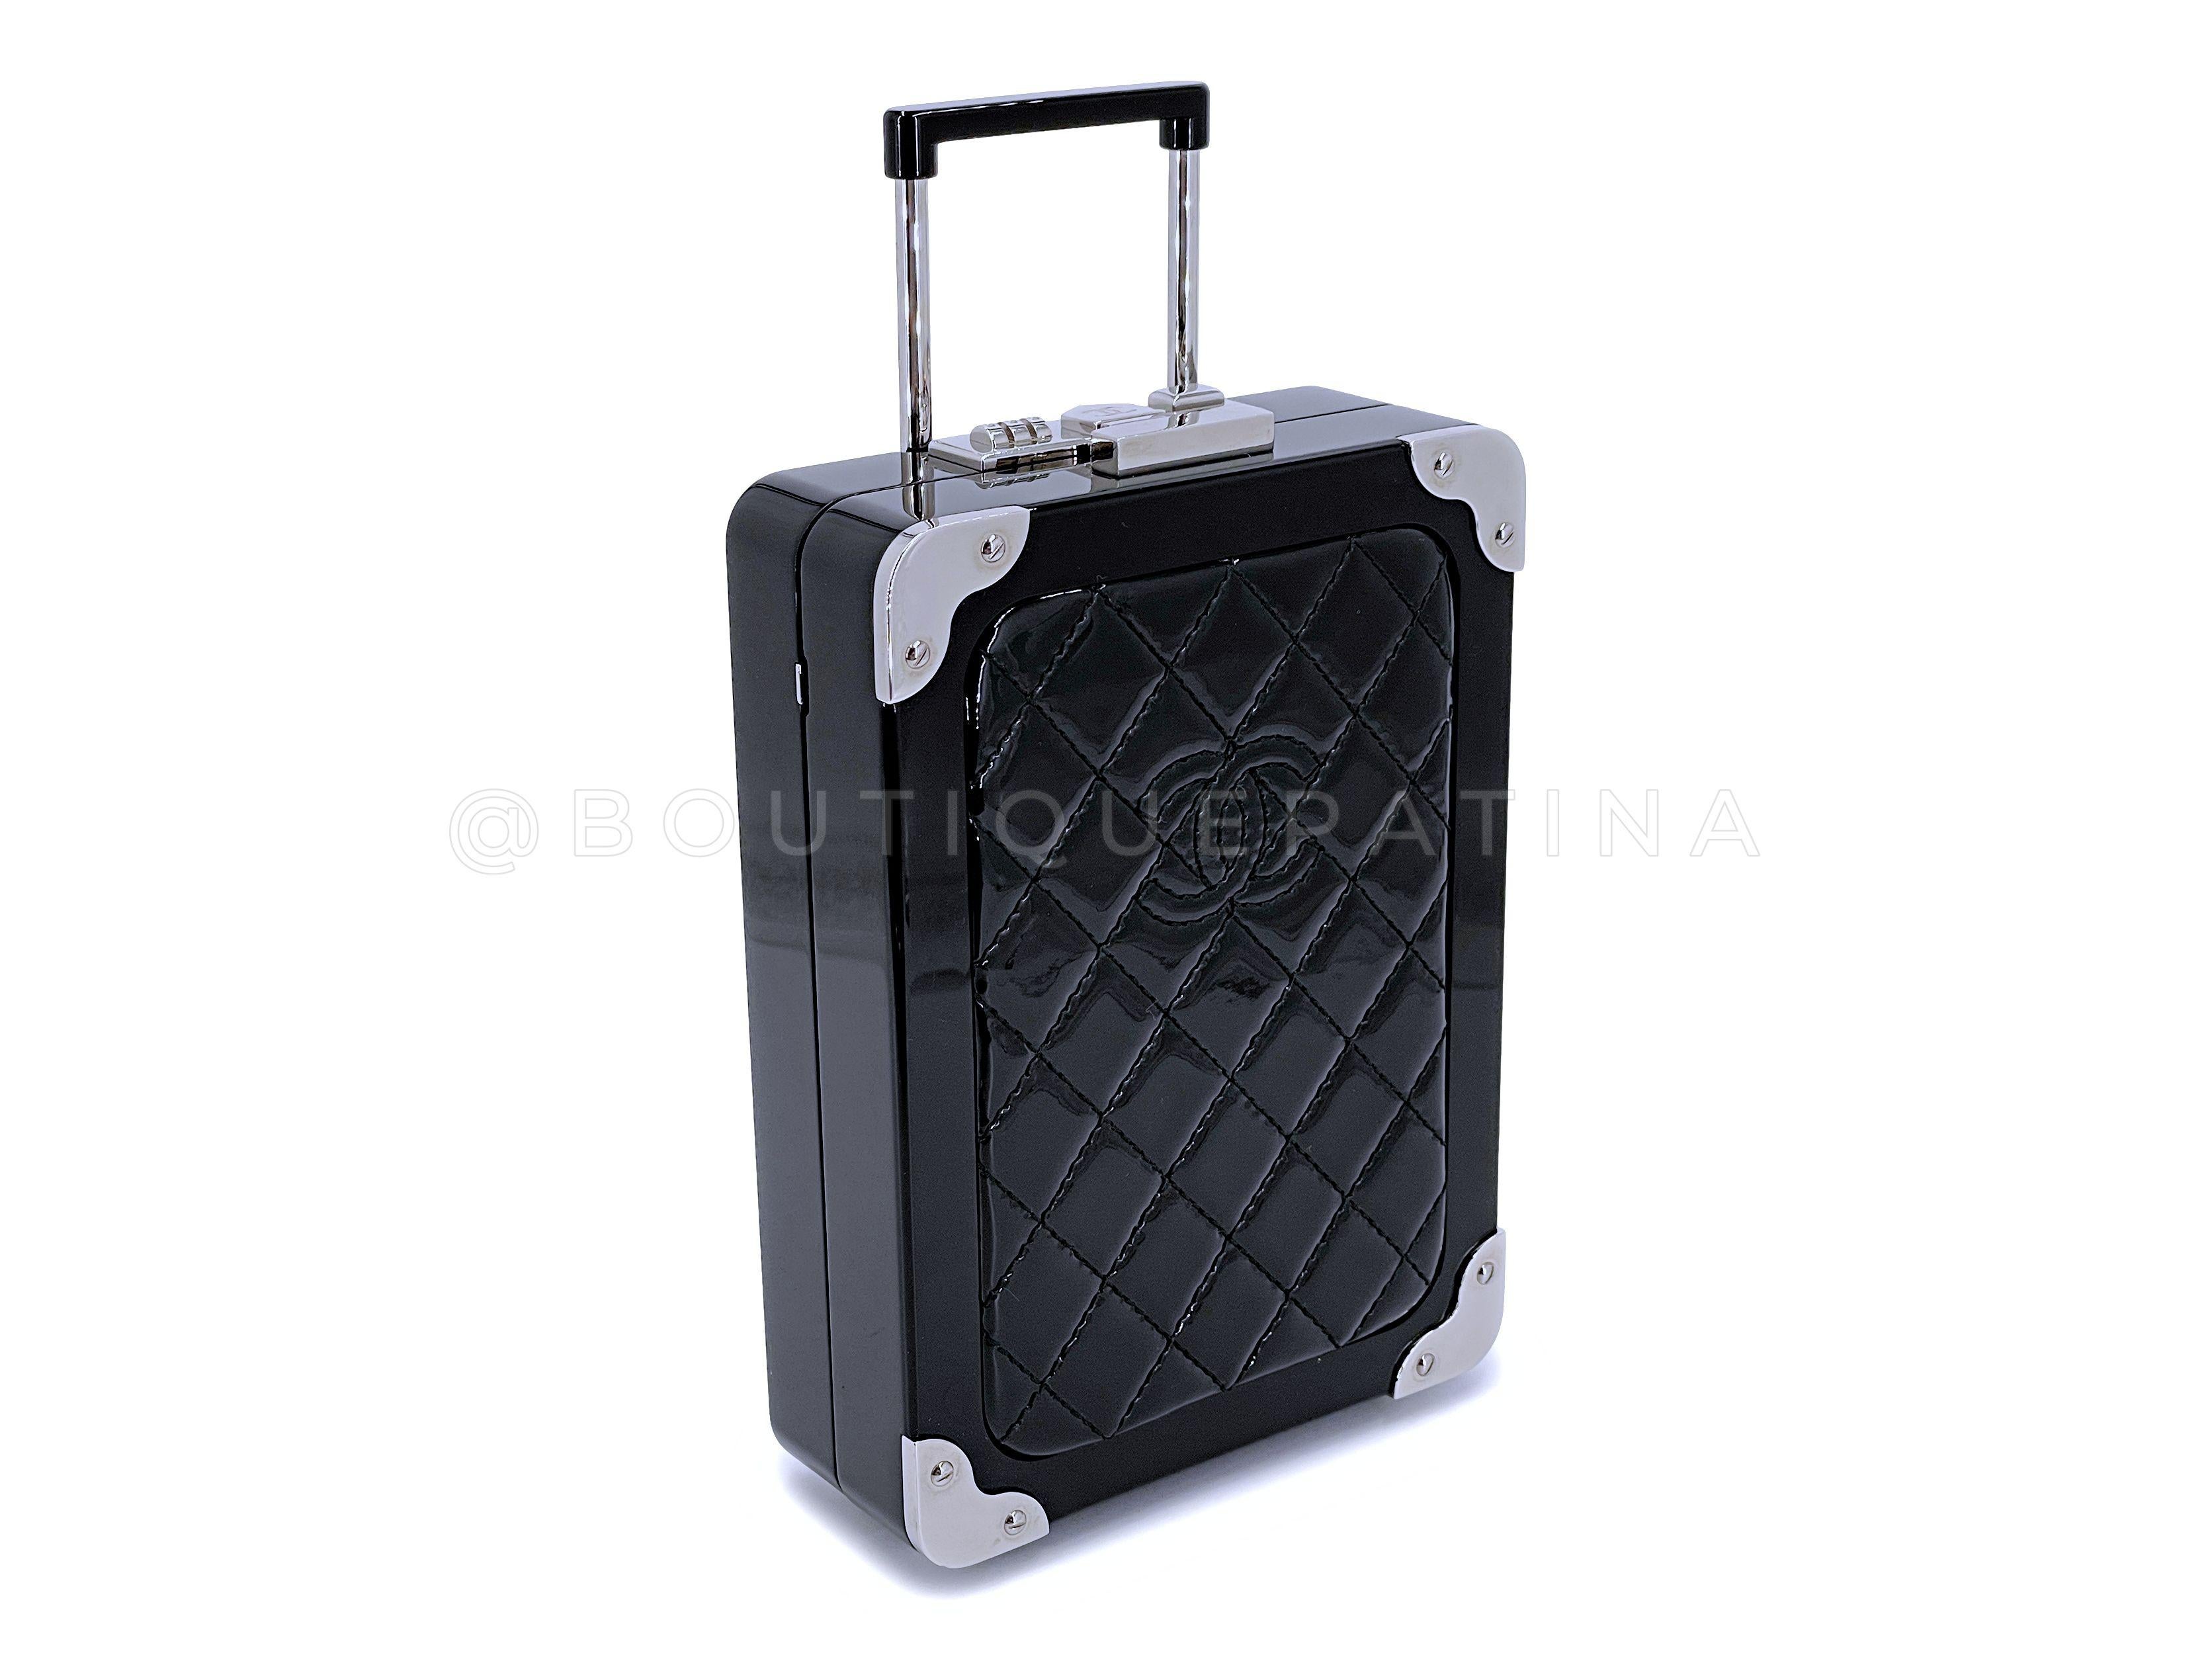 Chanel 2016 Airlines Evening In The Air Trolley Minaudière Bag Black 67163 In Excellent Condition For Sale In Costa Mesa, CA